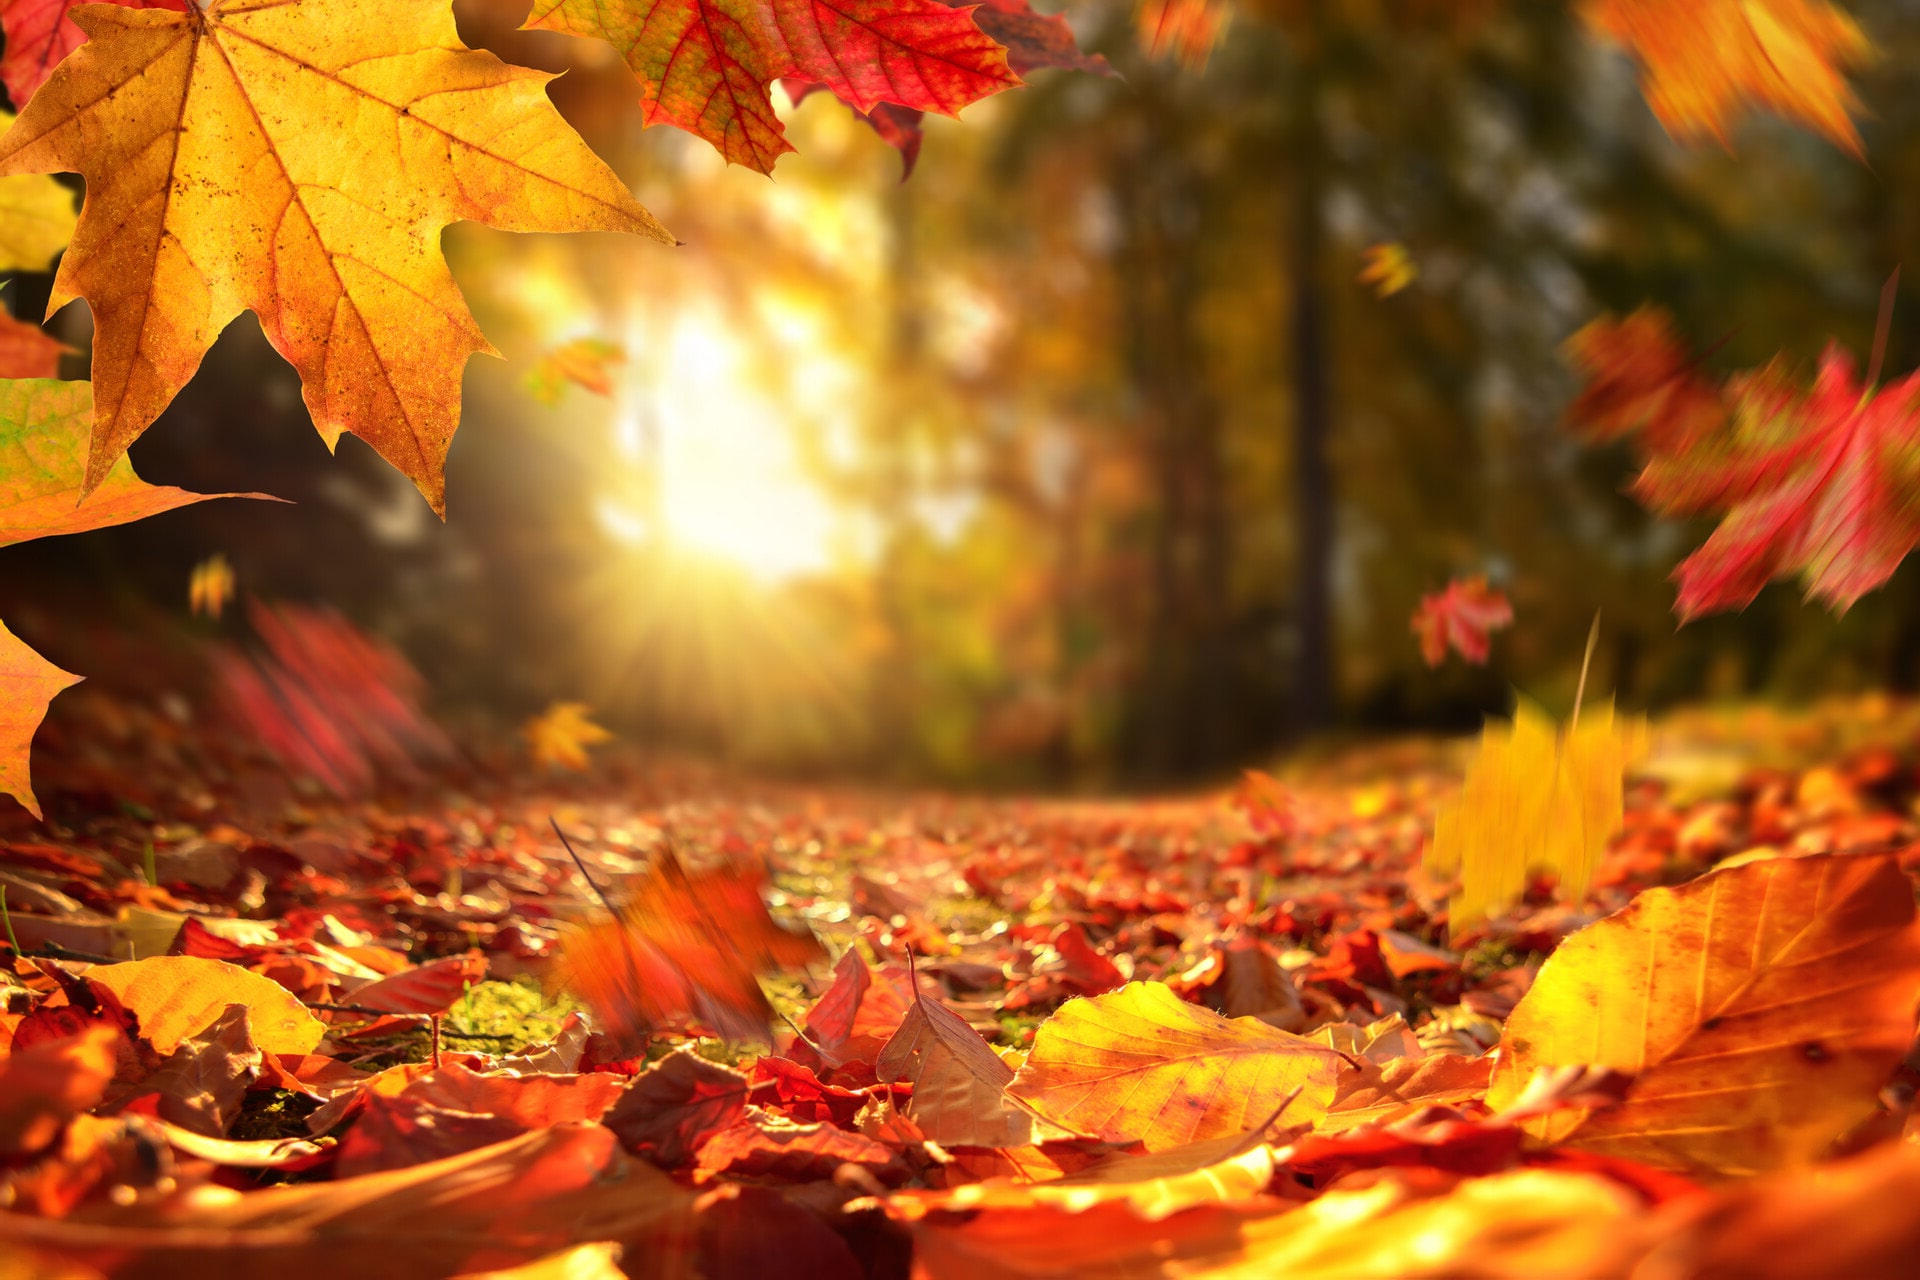 Autumn Leaves Wallpaper Hd Kolpaper Awesome Free Hd Wallpapers